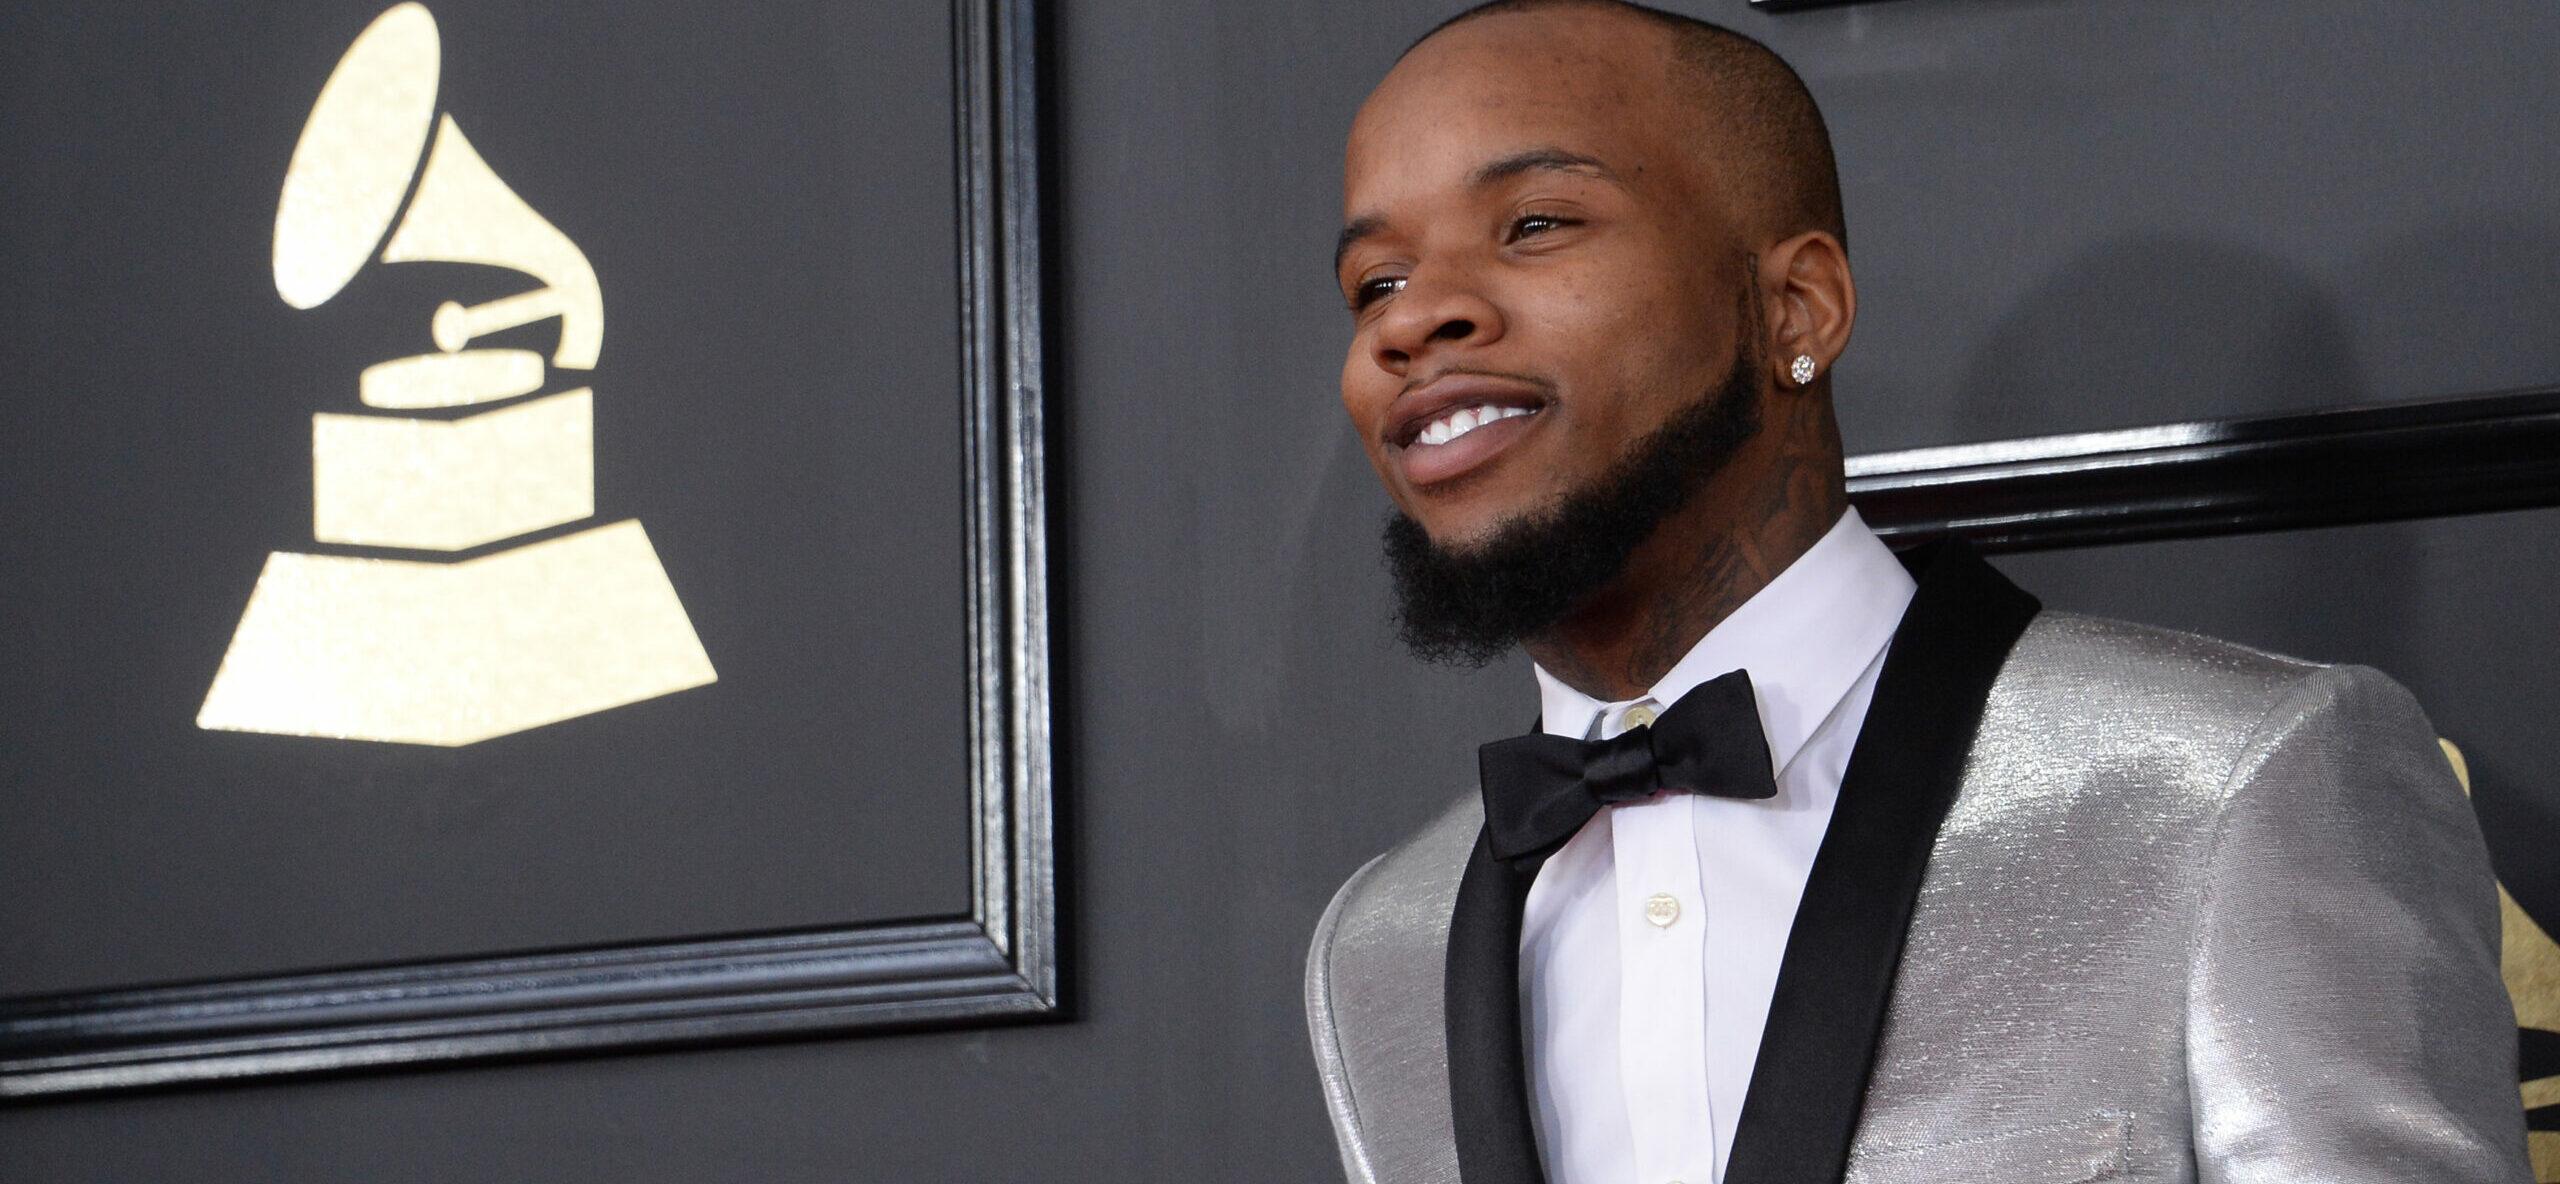 Tory Lanez ‘Remains Confident’ As He Releases New Music From Behind Bars